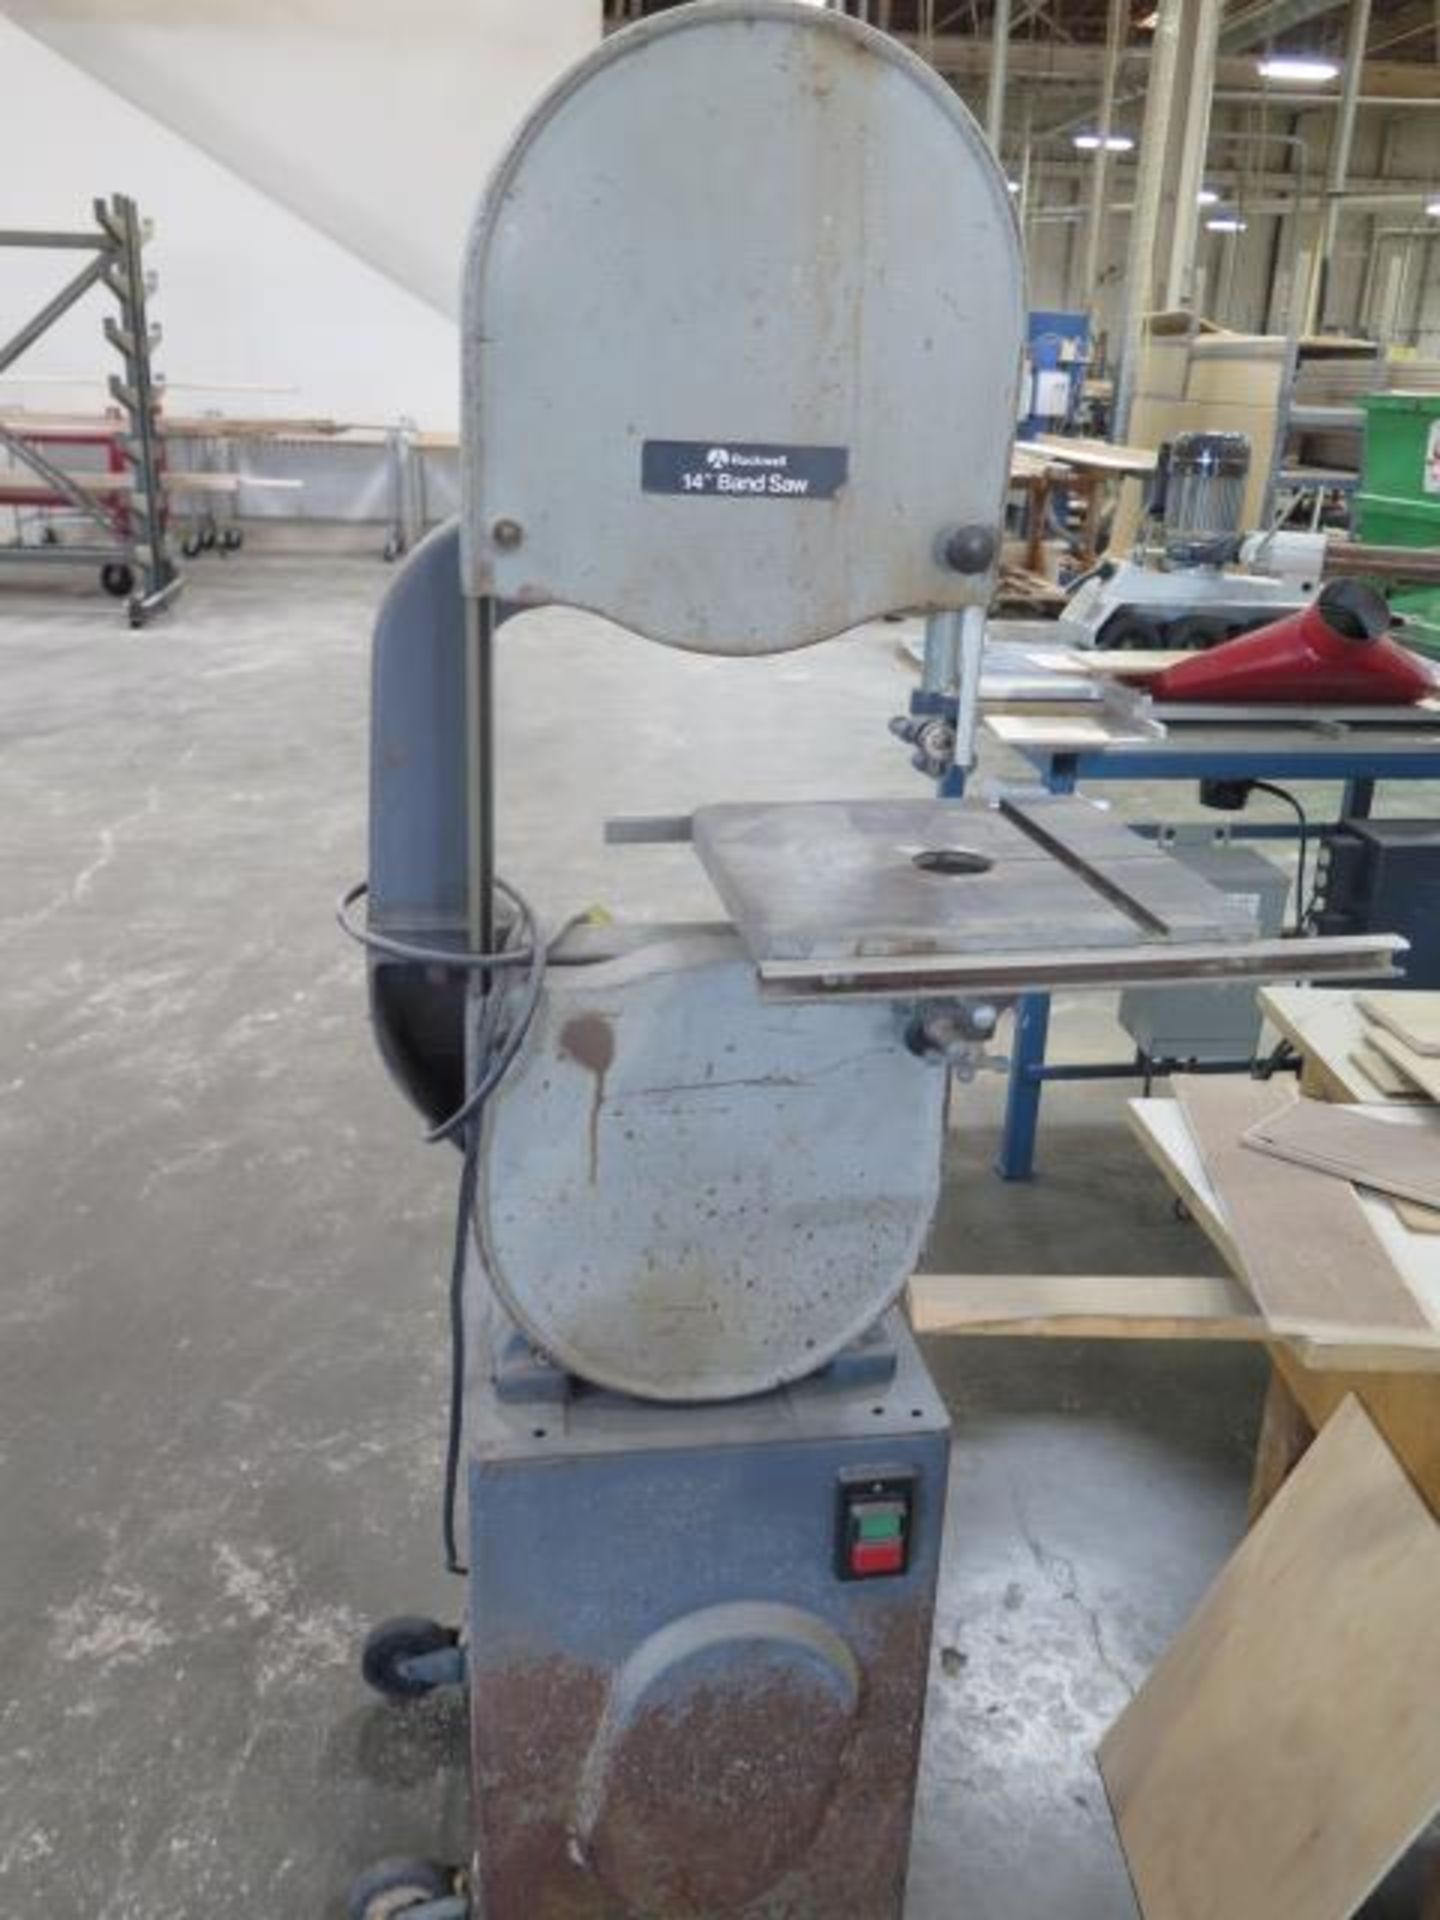 Rockwell 14” Vertical Band Saw w/ Stand (SOLD AS-IS - NO WARRANTY) - Image 4 of 6